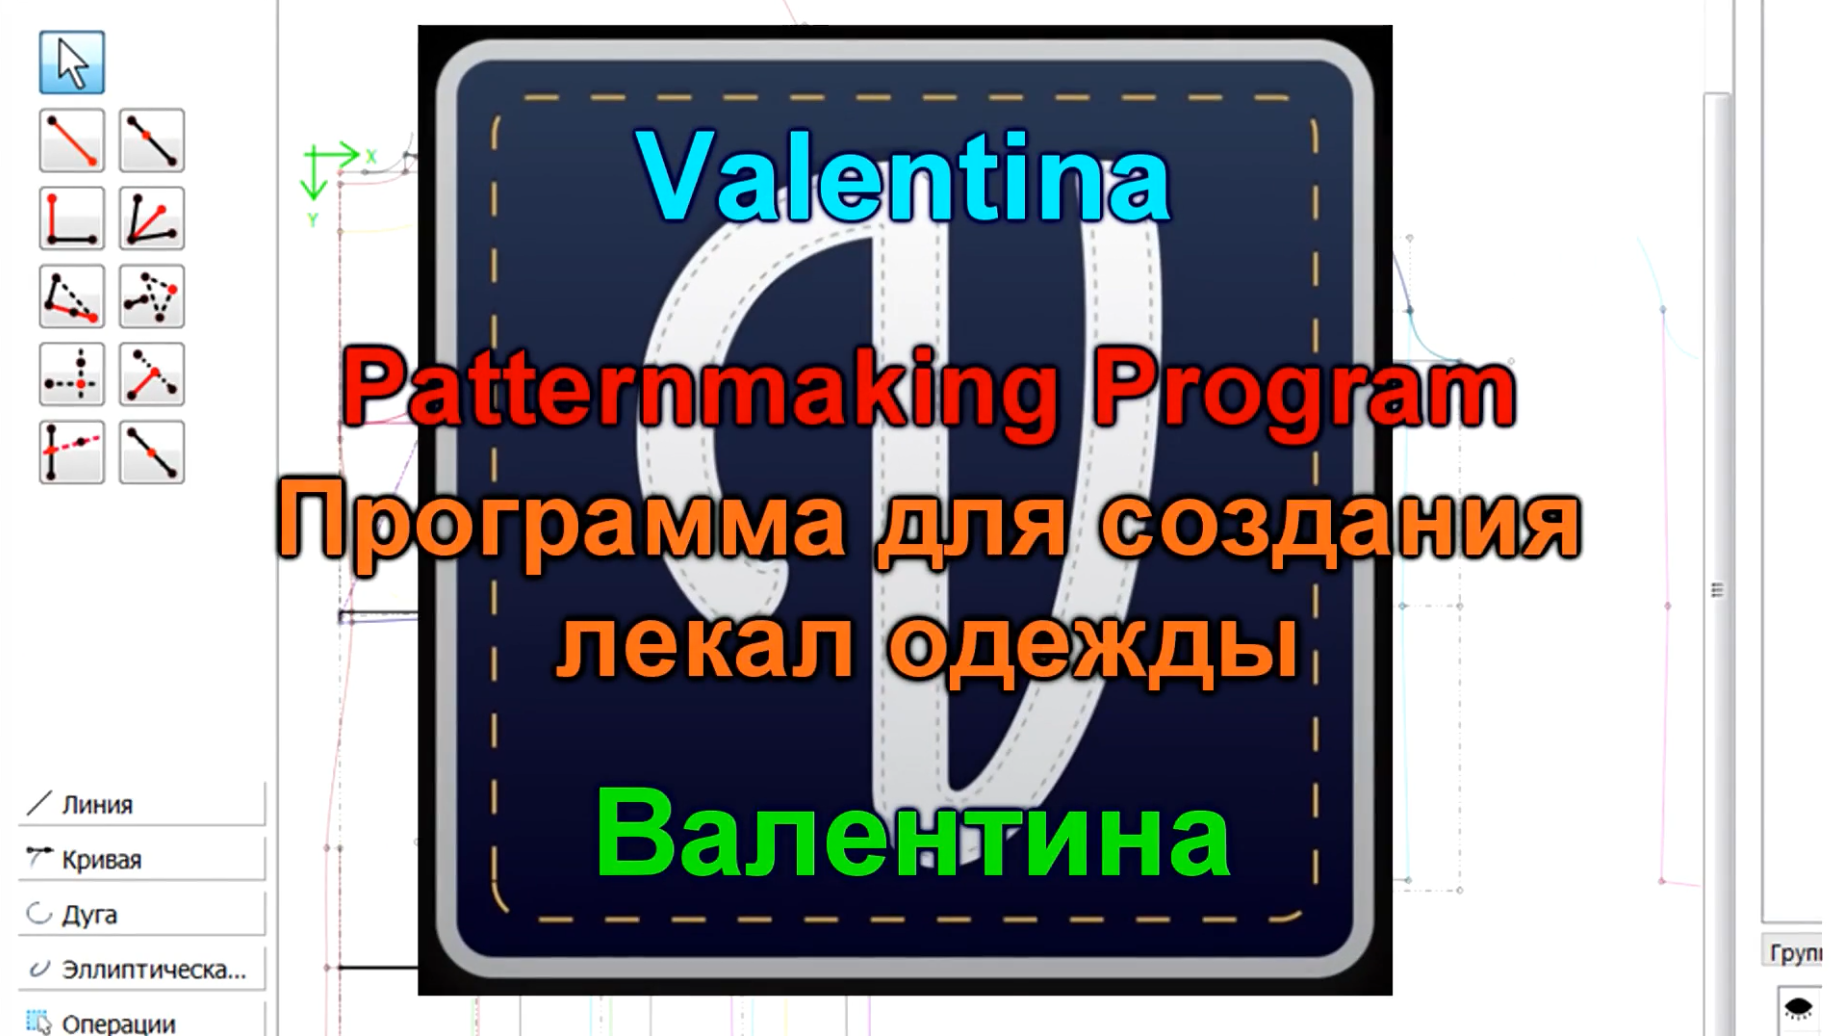 Video Tutorial for Beginners (Russian language)